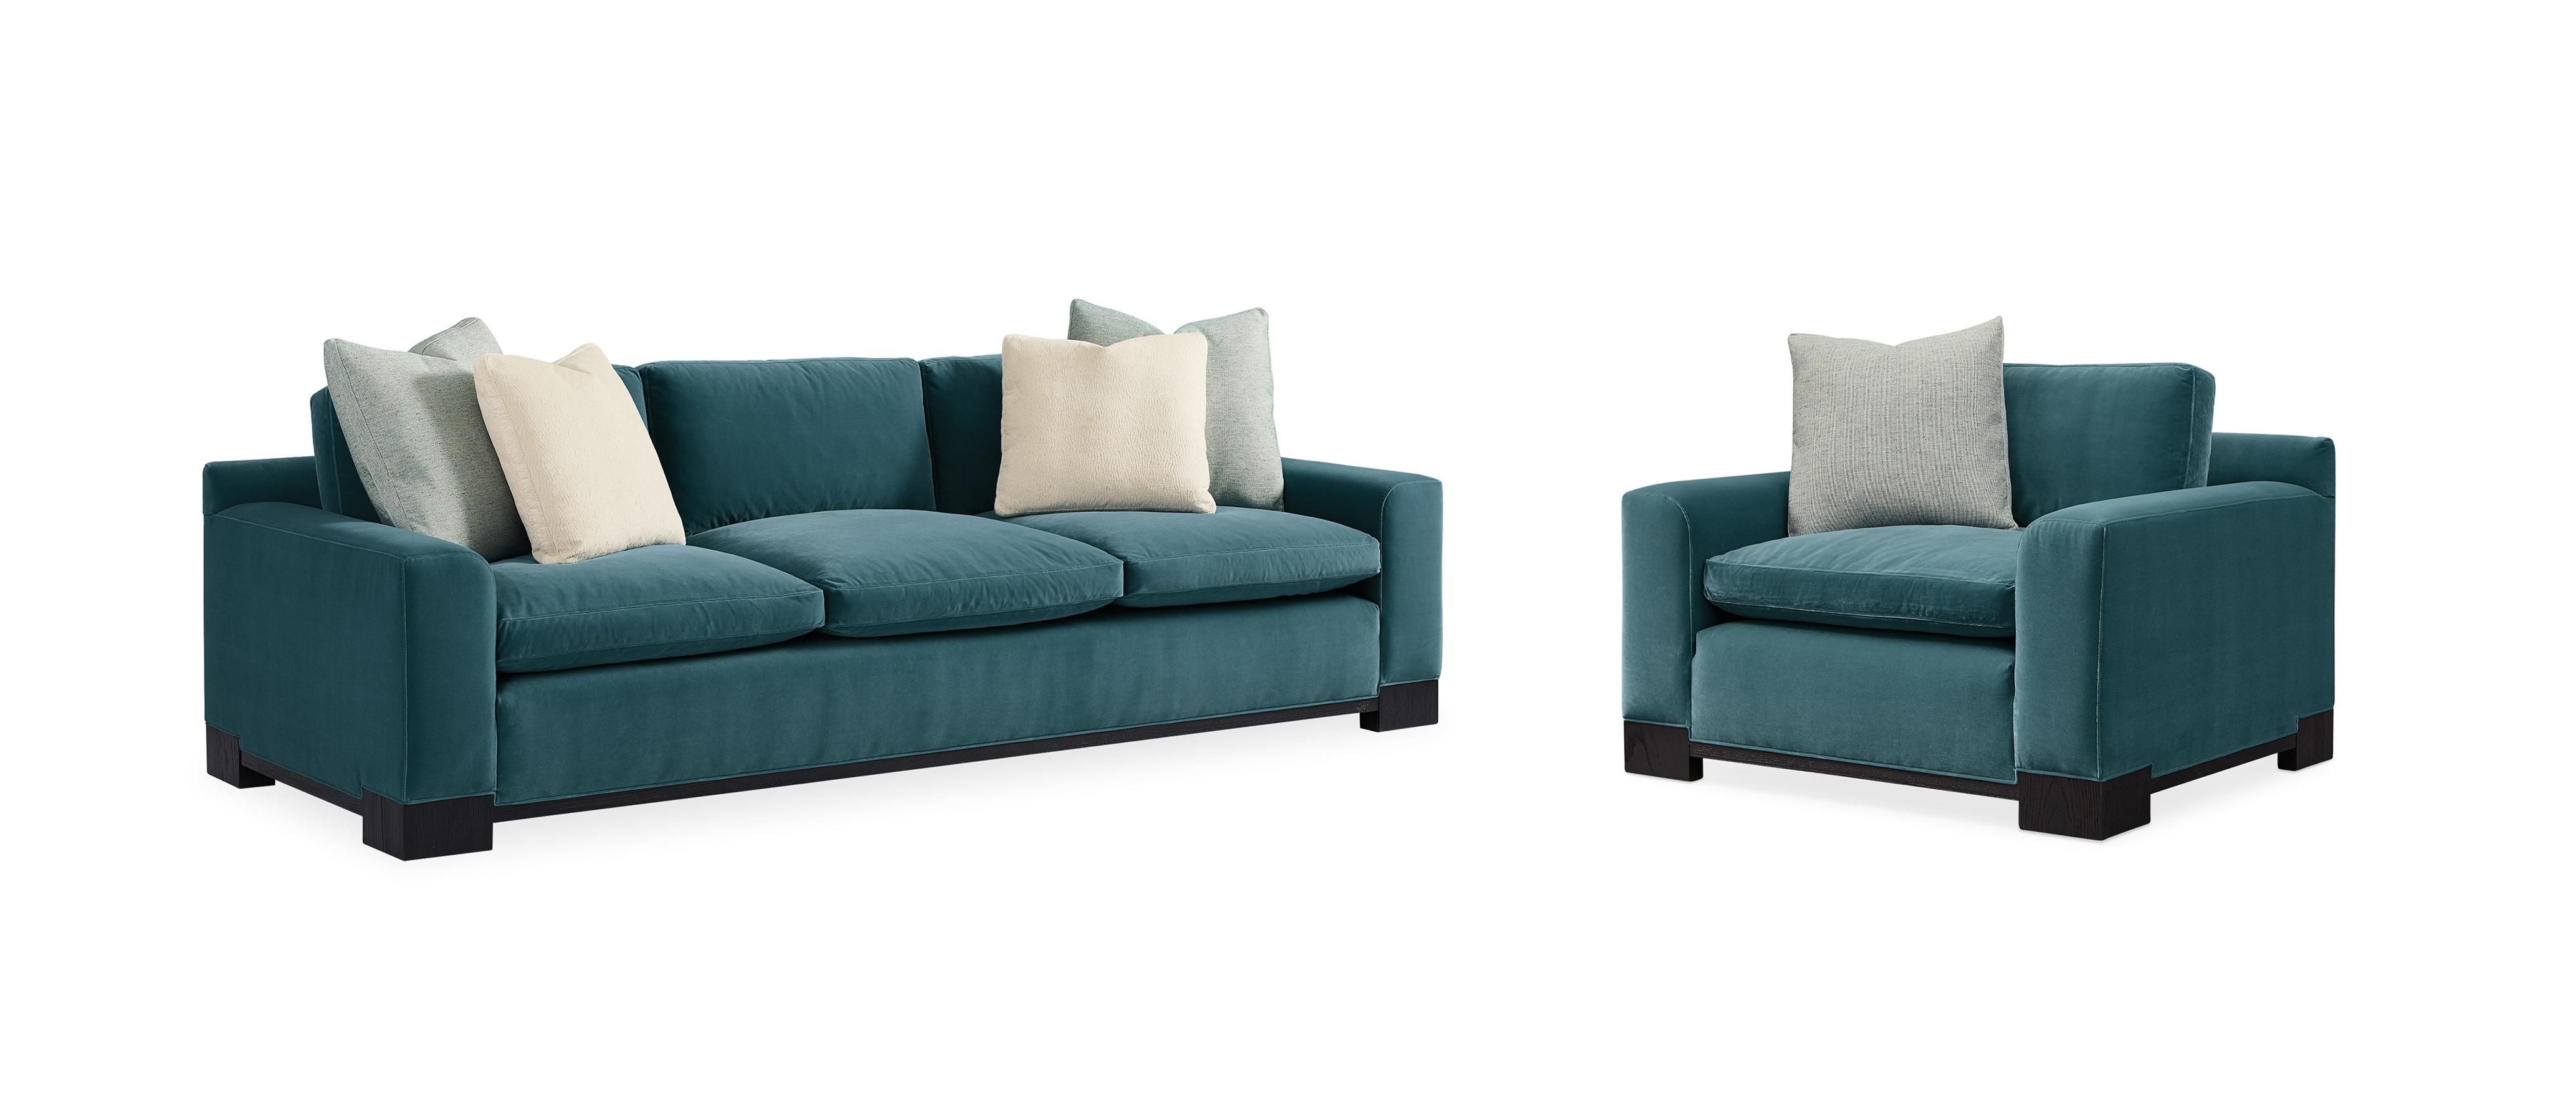 Contemporary Sofa and Chair REFRESH SOFA M110-019-011-B-Set-2 in Blue-green Velvet